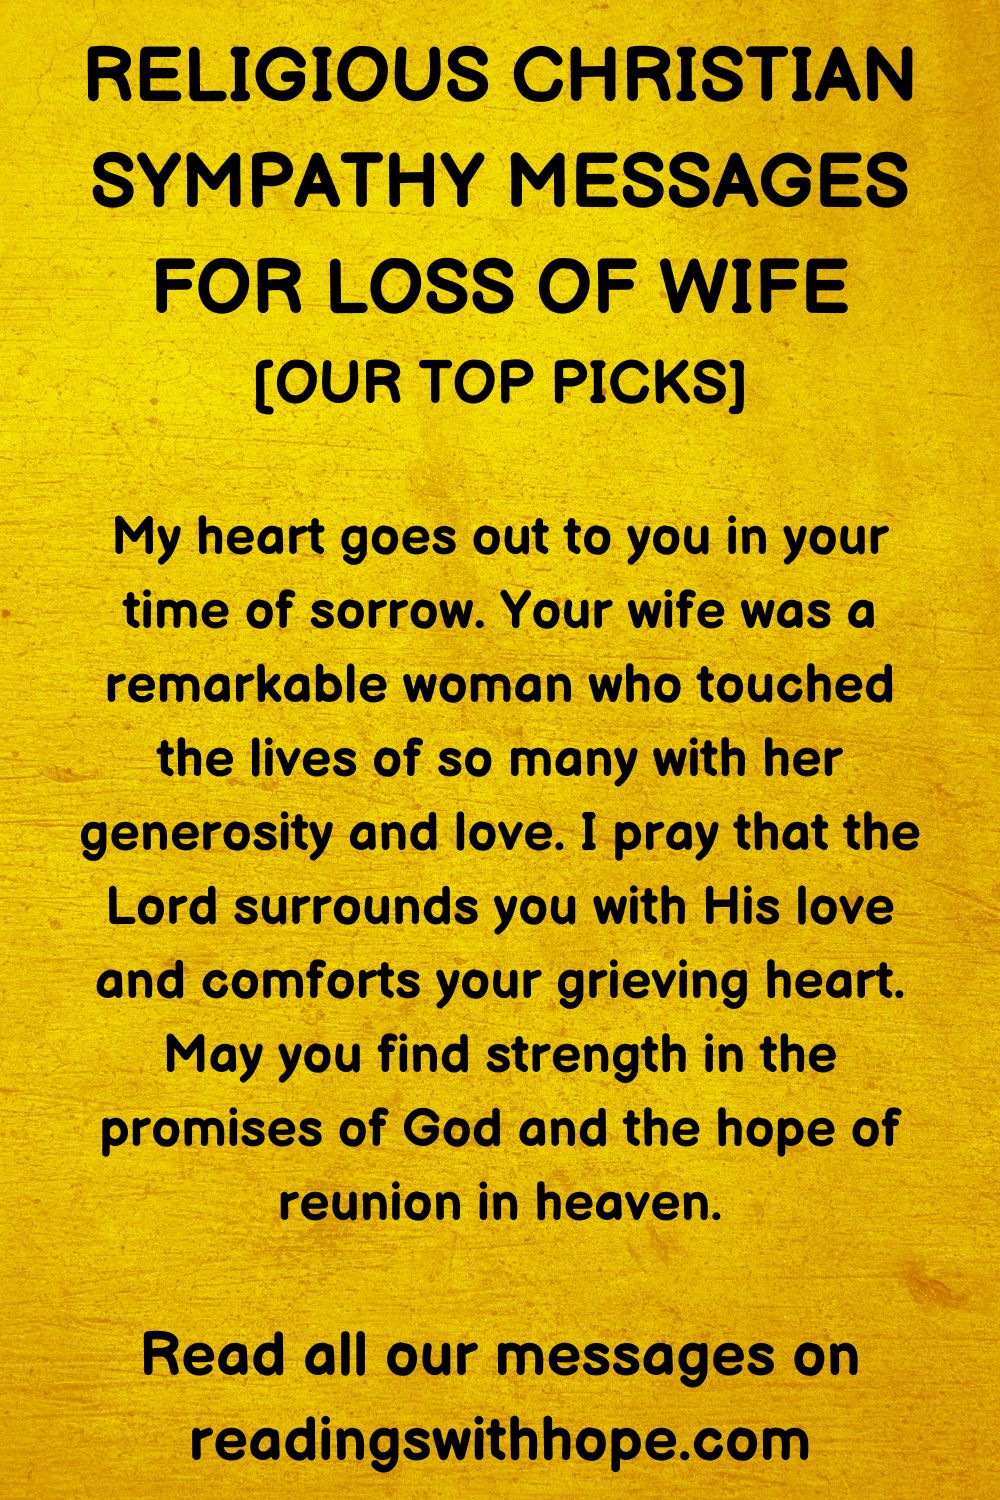 Religious Christian Sympathy Message for Loss of Wife
